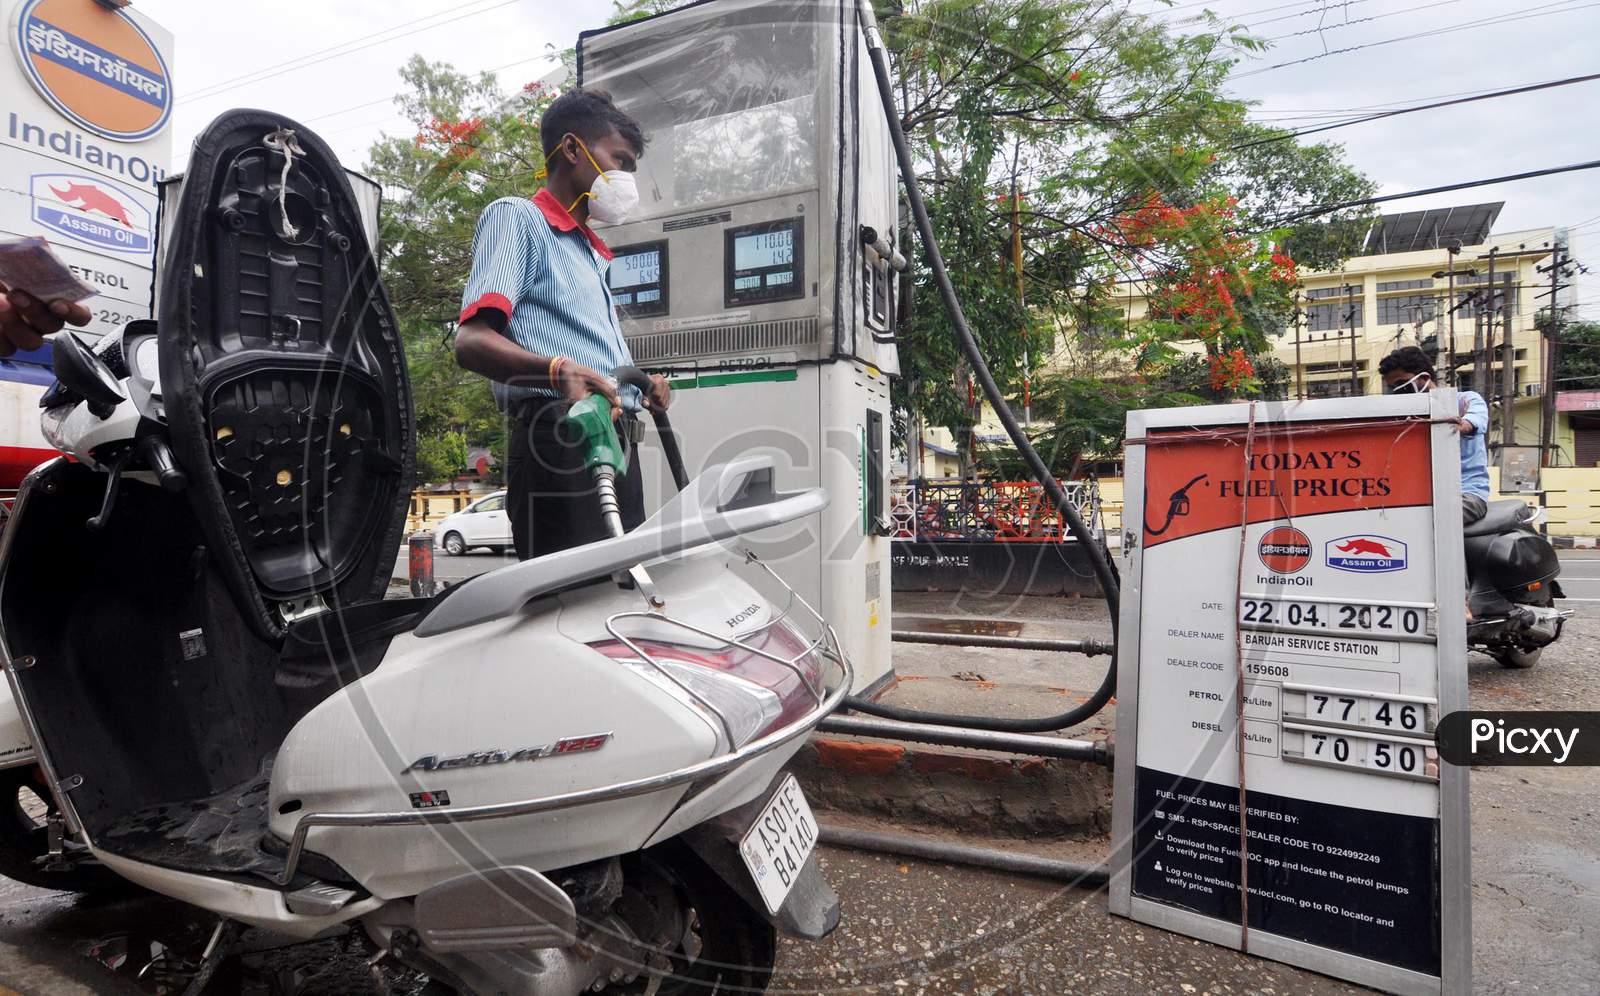 A Worker Re-filling a scooty At A Petrol Station During A Nationwide Lockdown Amidst COVID-19 or Coronavirus Outbreak  In Guwahati On April 22, 2020